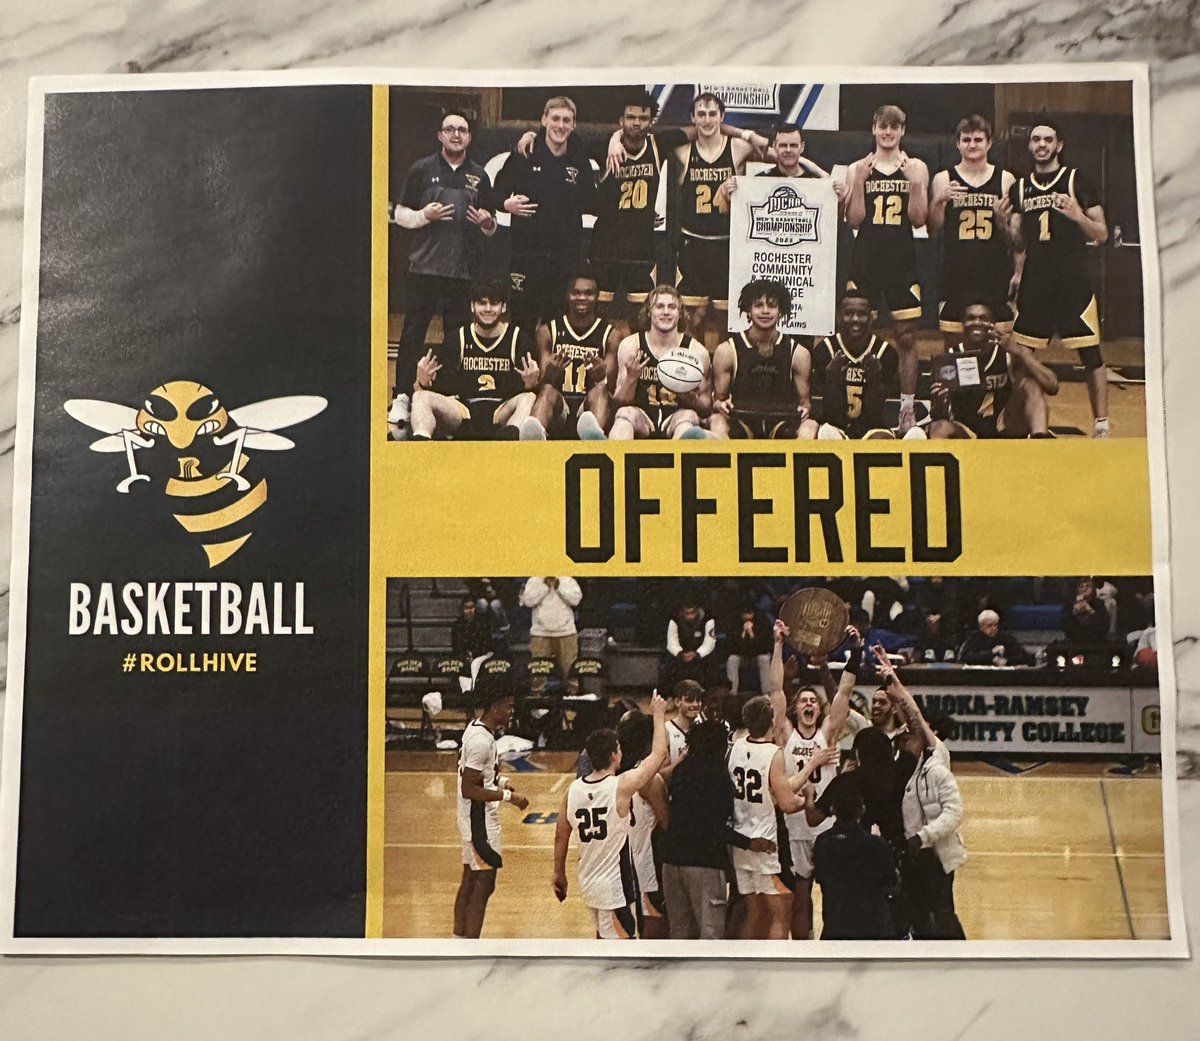 After a great visit, I’m very grateful to receive an offer from @RCTC_MBB